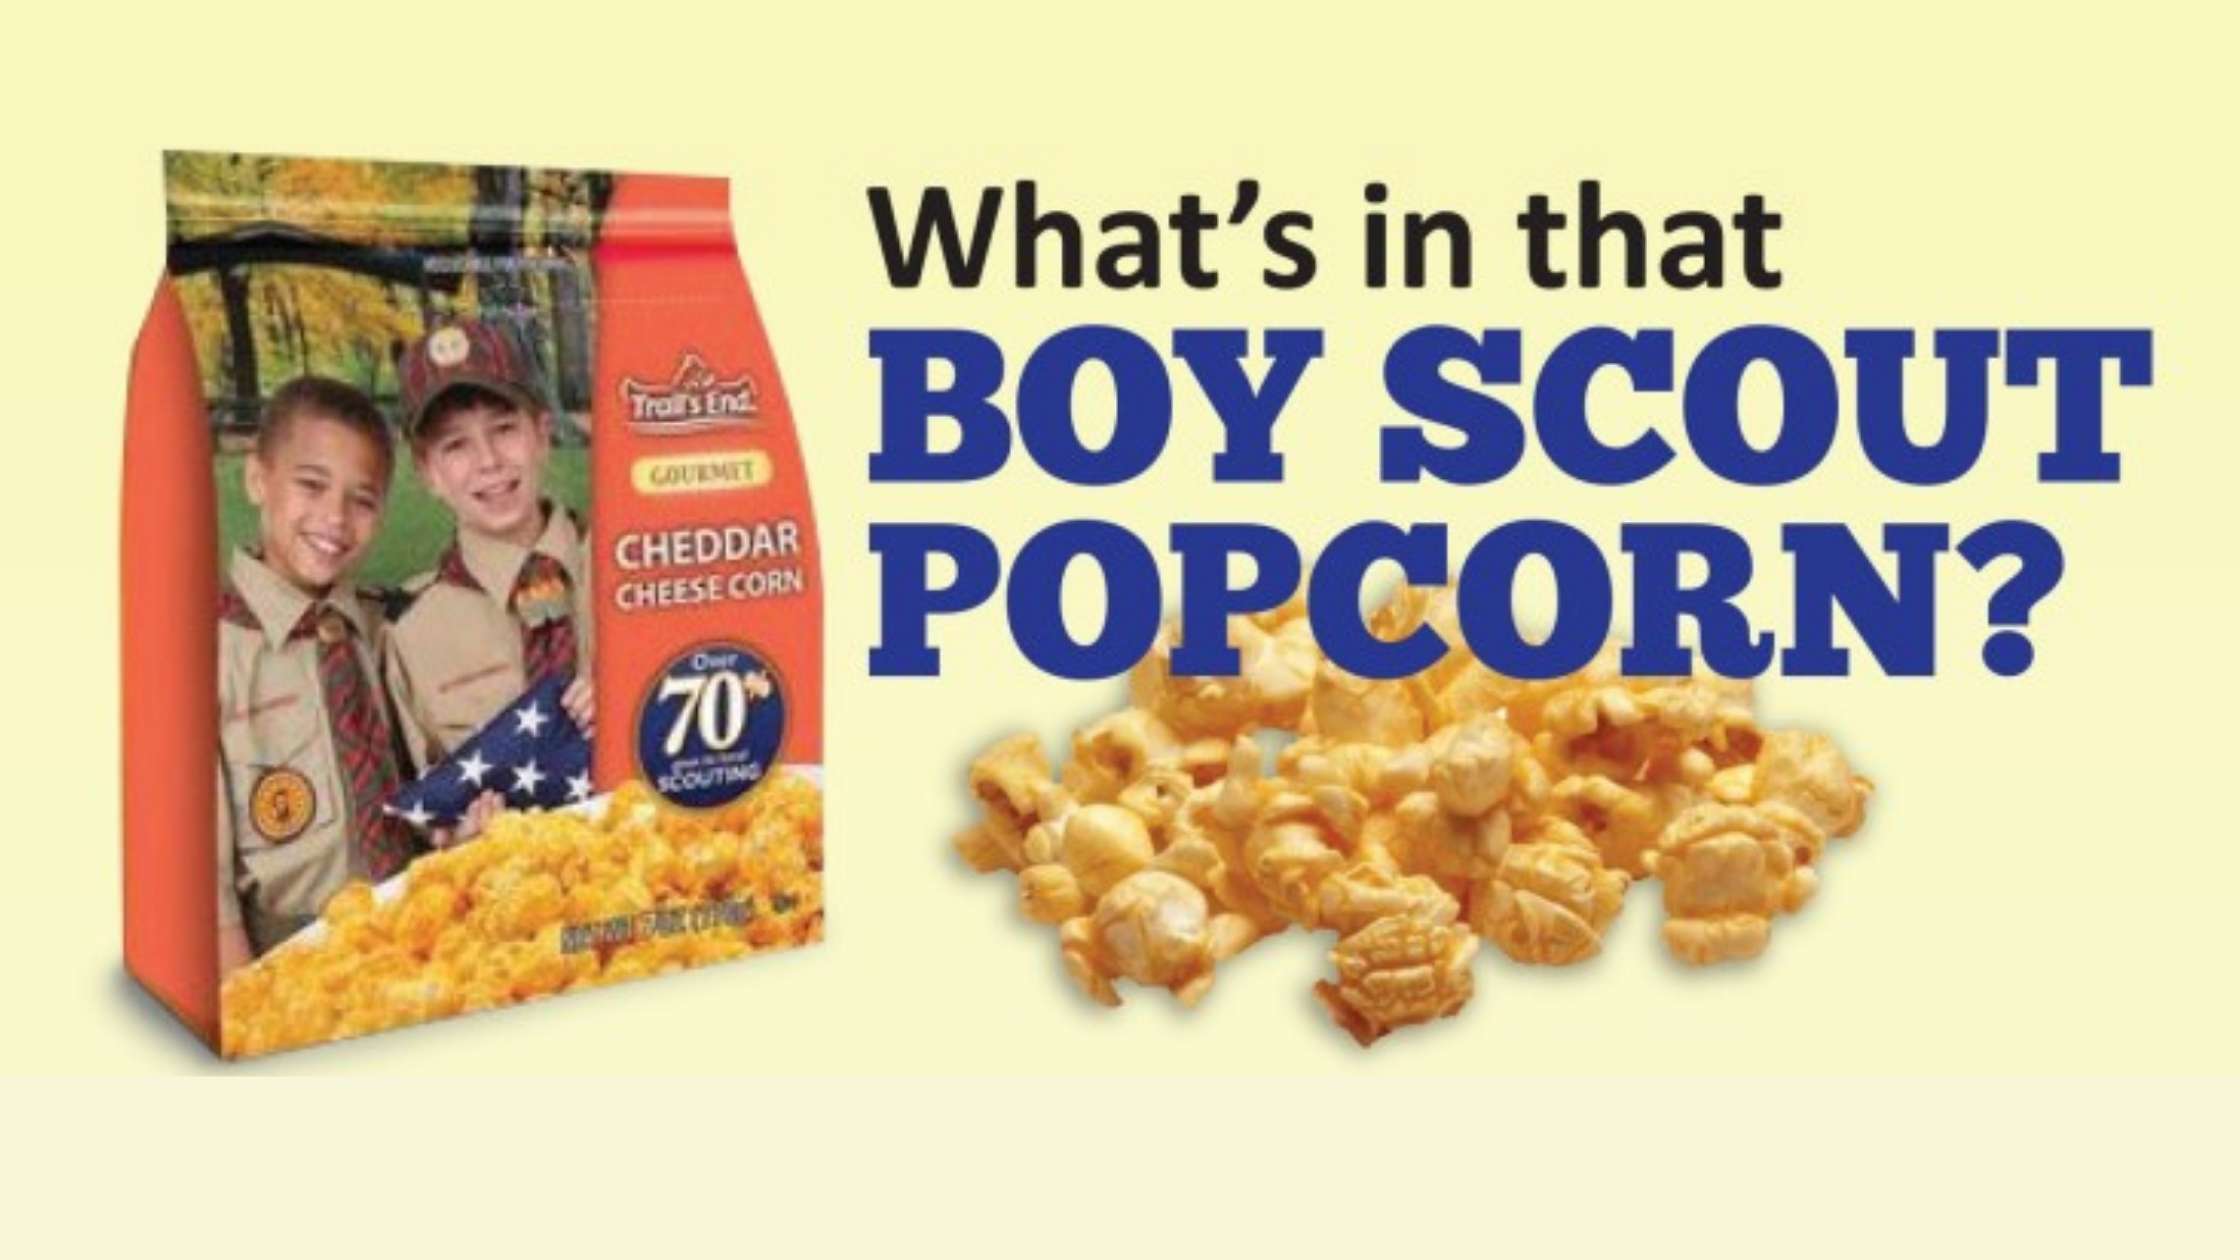 Boy Scout Popcorn What's in that Bag?